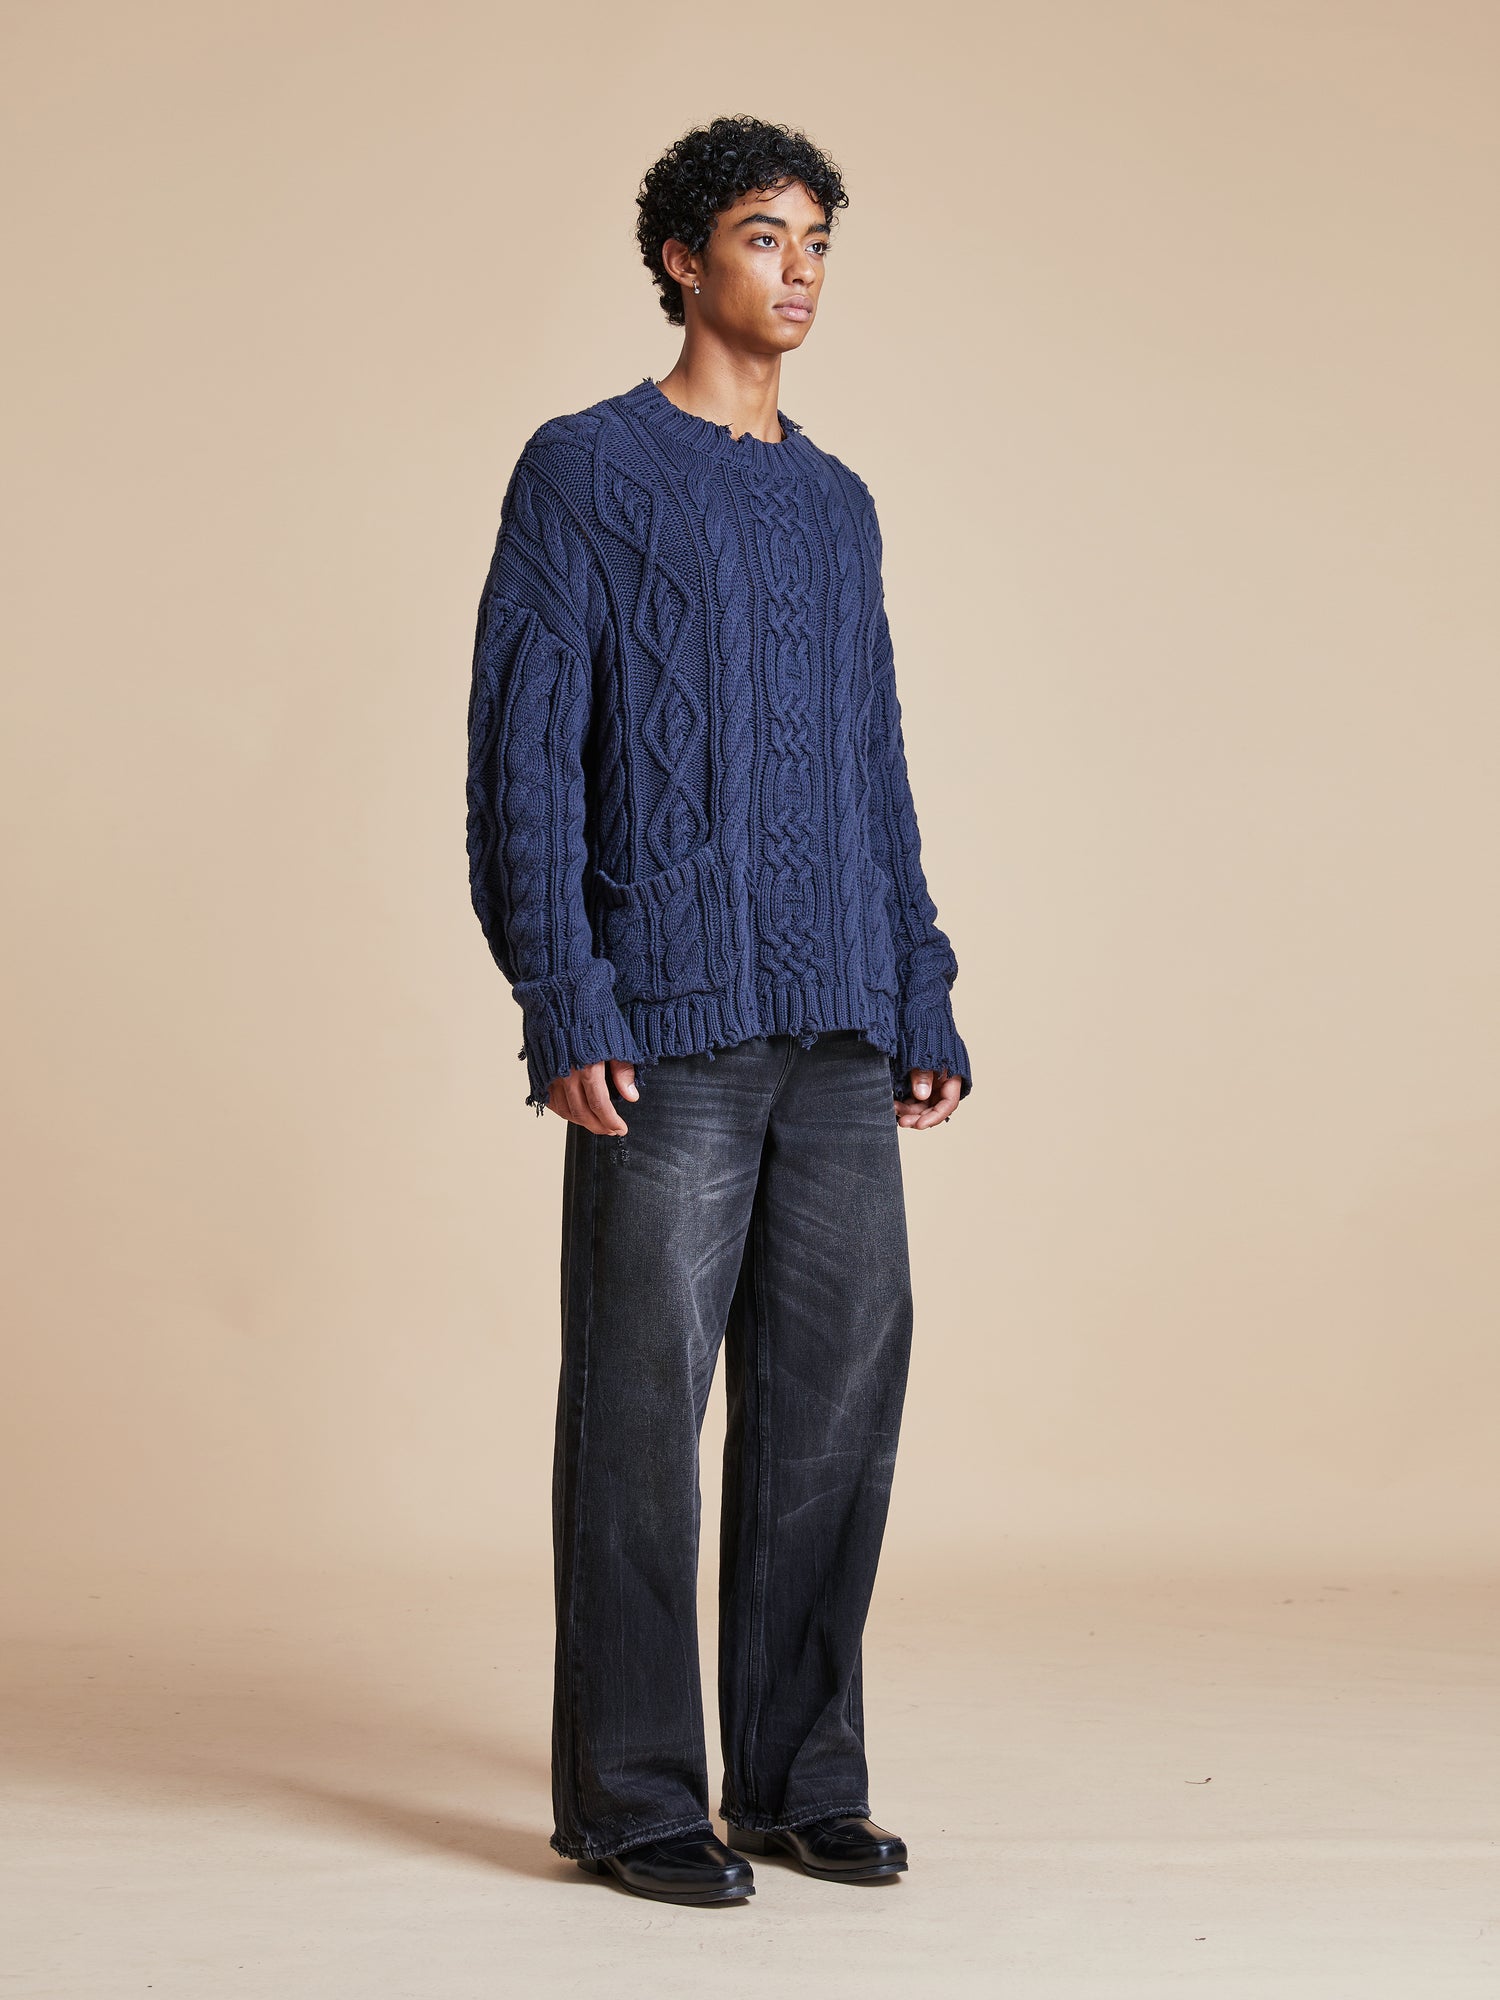 A man wearing the Found Astral Distressed Cable Knit Sweater in a blue color.